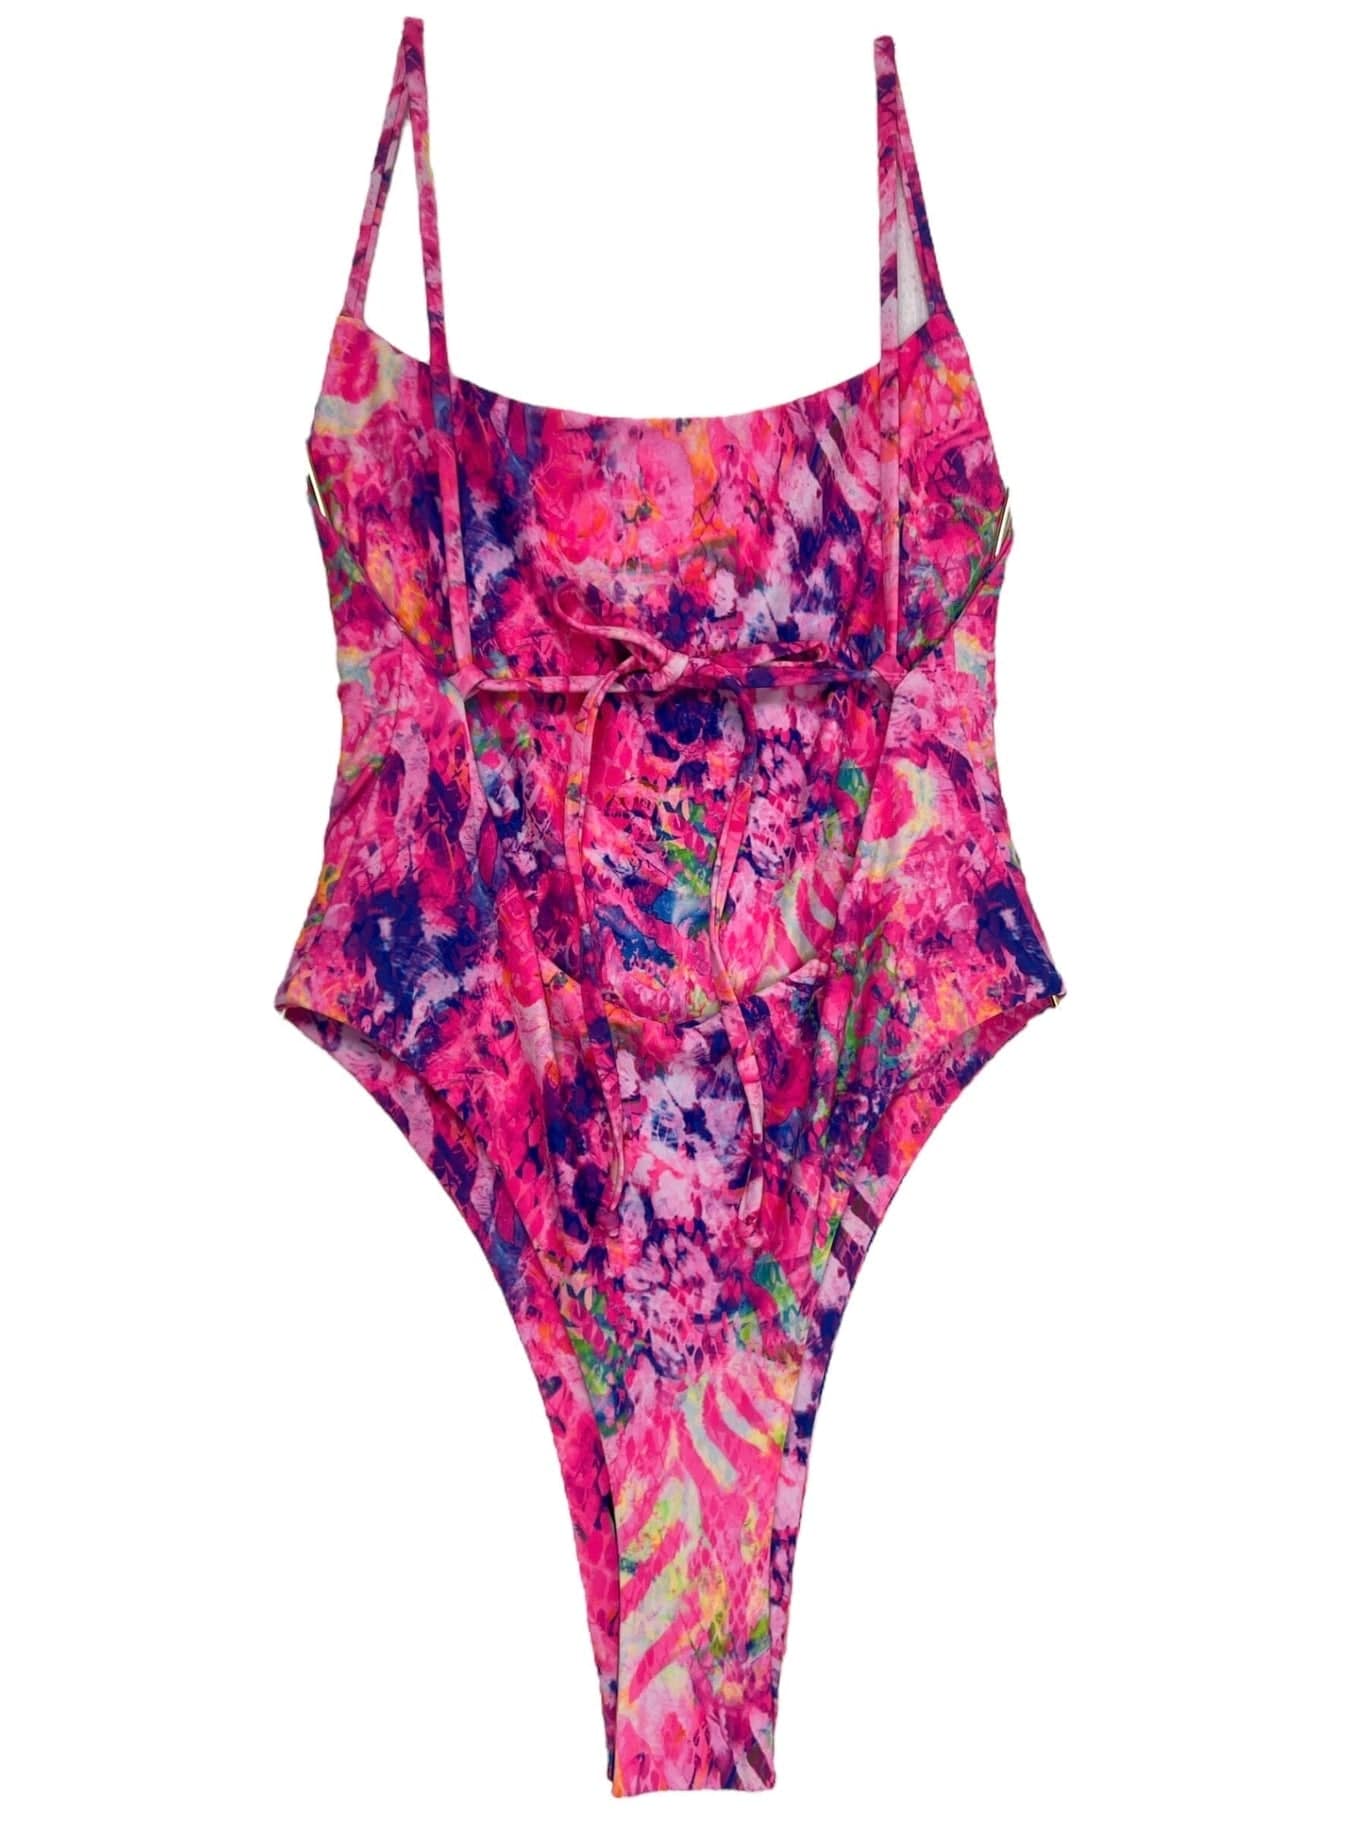 Berry Beachy Swimwear Apparel & Accessories > Clothing > Swimwear Pink Fantasia Very Cheeky Thong One Piece Swimsuit 2024 Sexy Pink Fantasia Side Boob One Piece Cheeky Thong Swimsuit